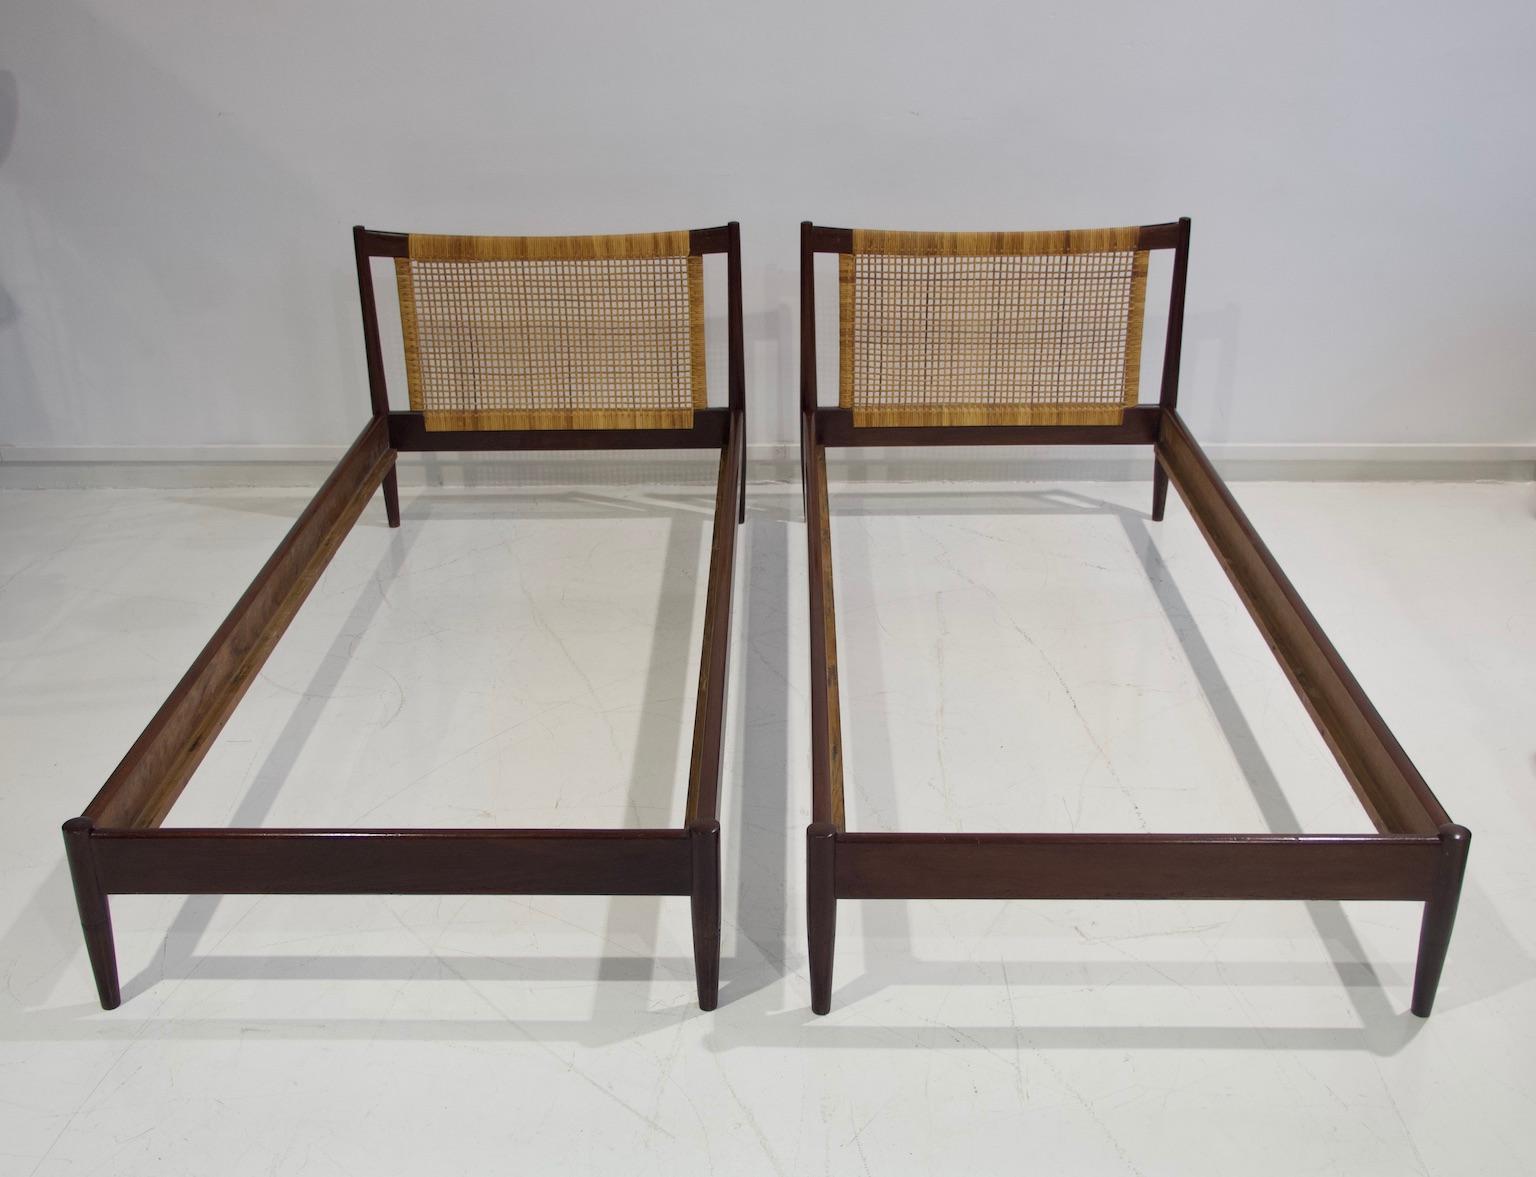 Pair of bed frames of wood with bedheads of braided rattan. Designed by Børge Mogensen and manufactured by Søborg Møbelfabrik in circa 1955. Very easy mechanism to set up and dismantle the beds.